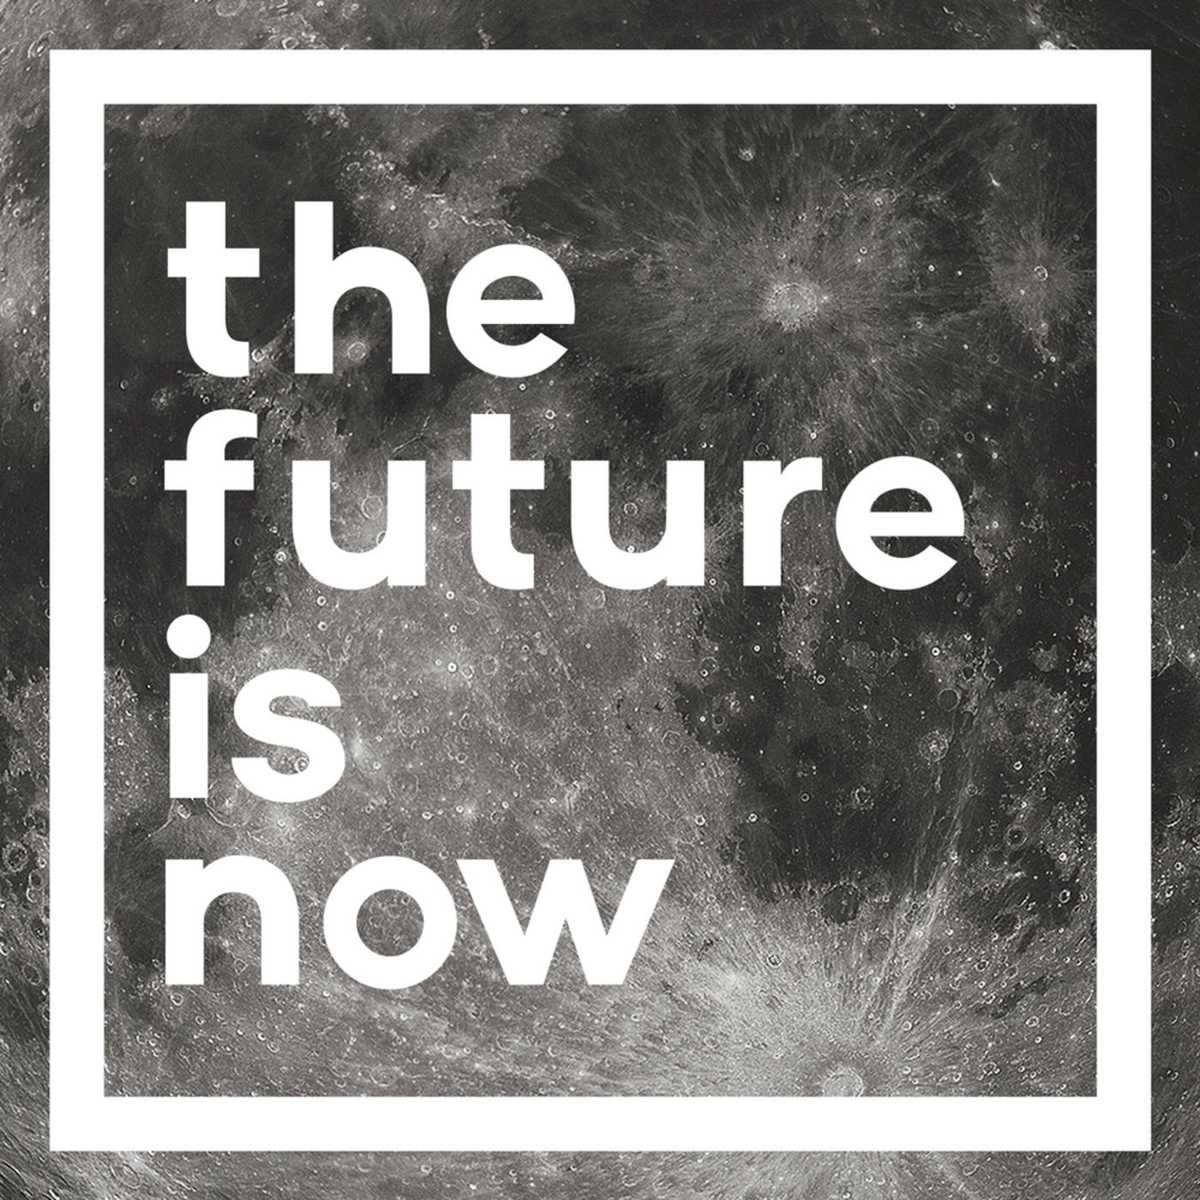 The Future Now!